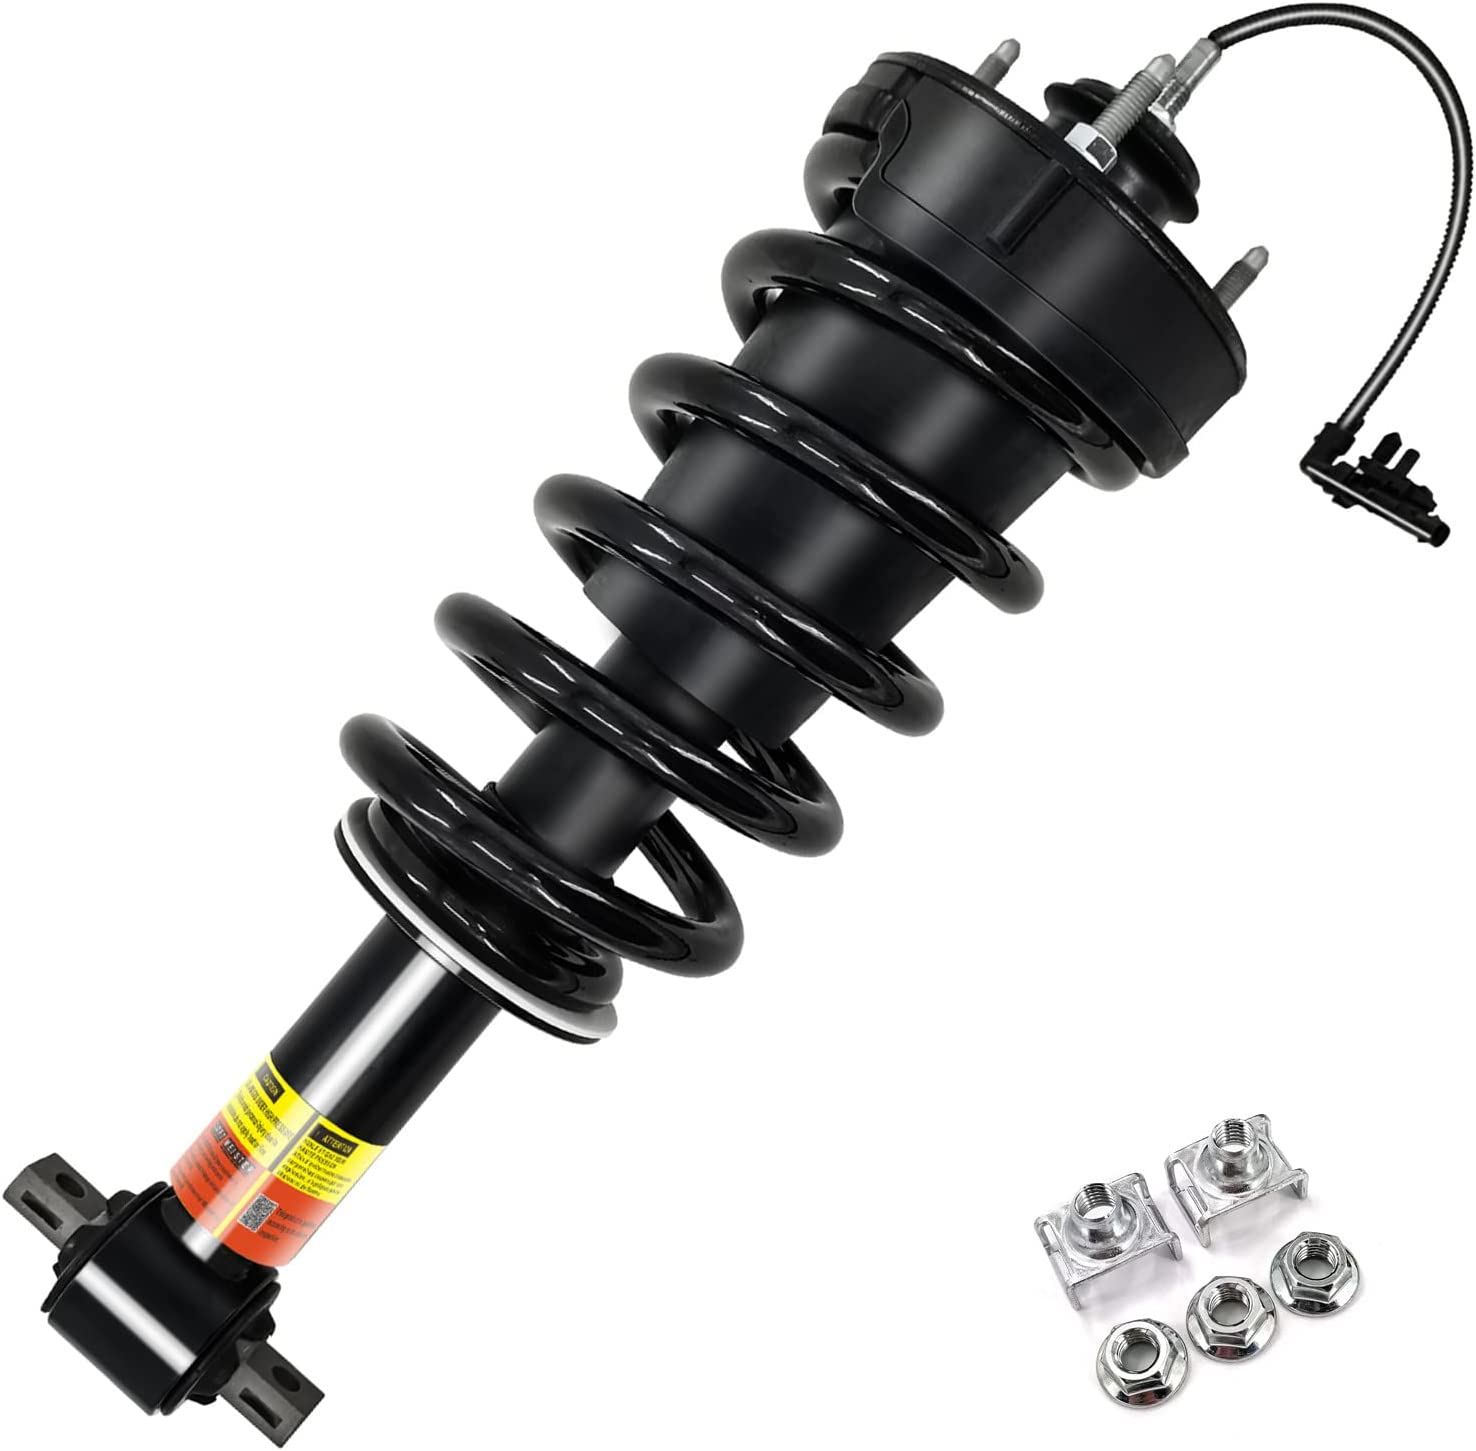 LUFT MEISTER 84176631 Front Struts Shock Absorber 84061228 with spring Assembly Fit for 2015-2021 Cadillac Escalade Tahoe Suburban Silverado GMC Sierra 1500 Yukon (XL)